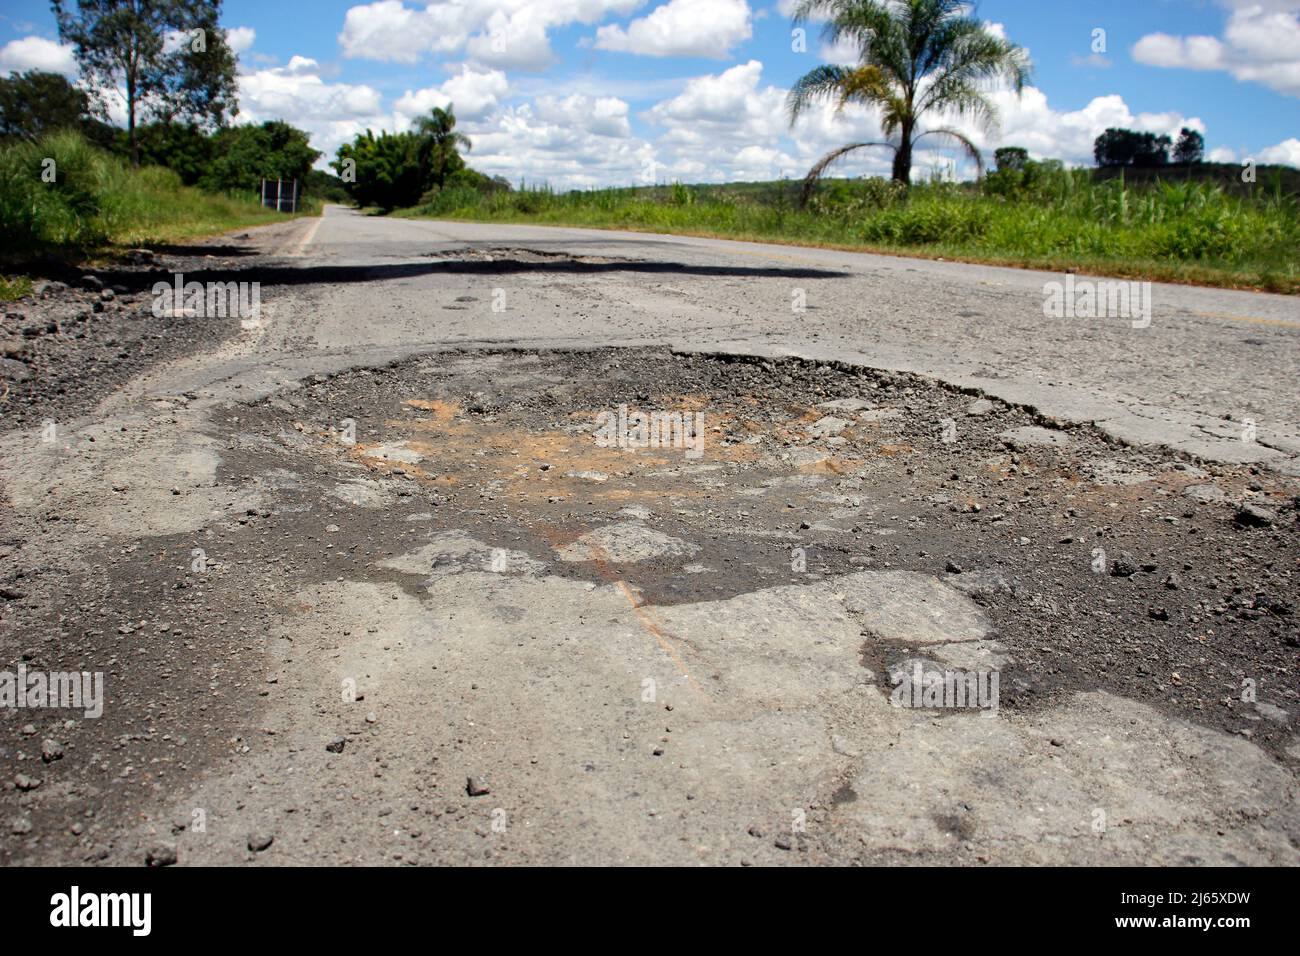 stretch of road with defective and spoiled asphalt, potholes and danger for traffic Stock Photo